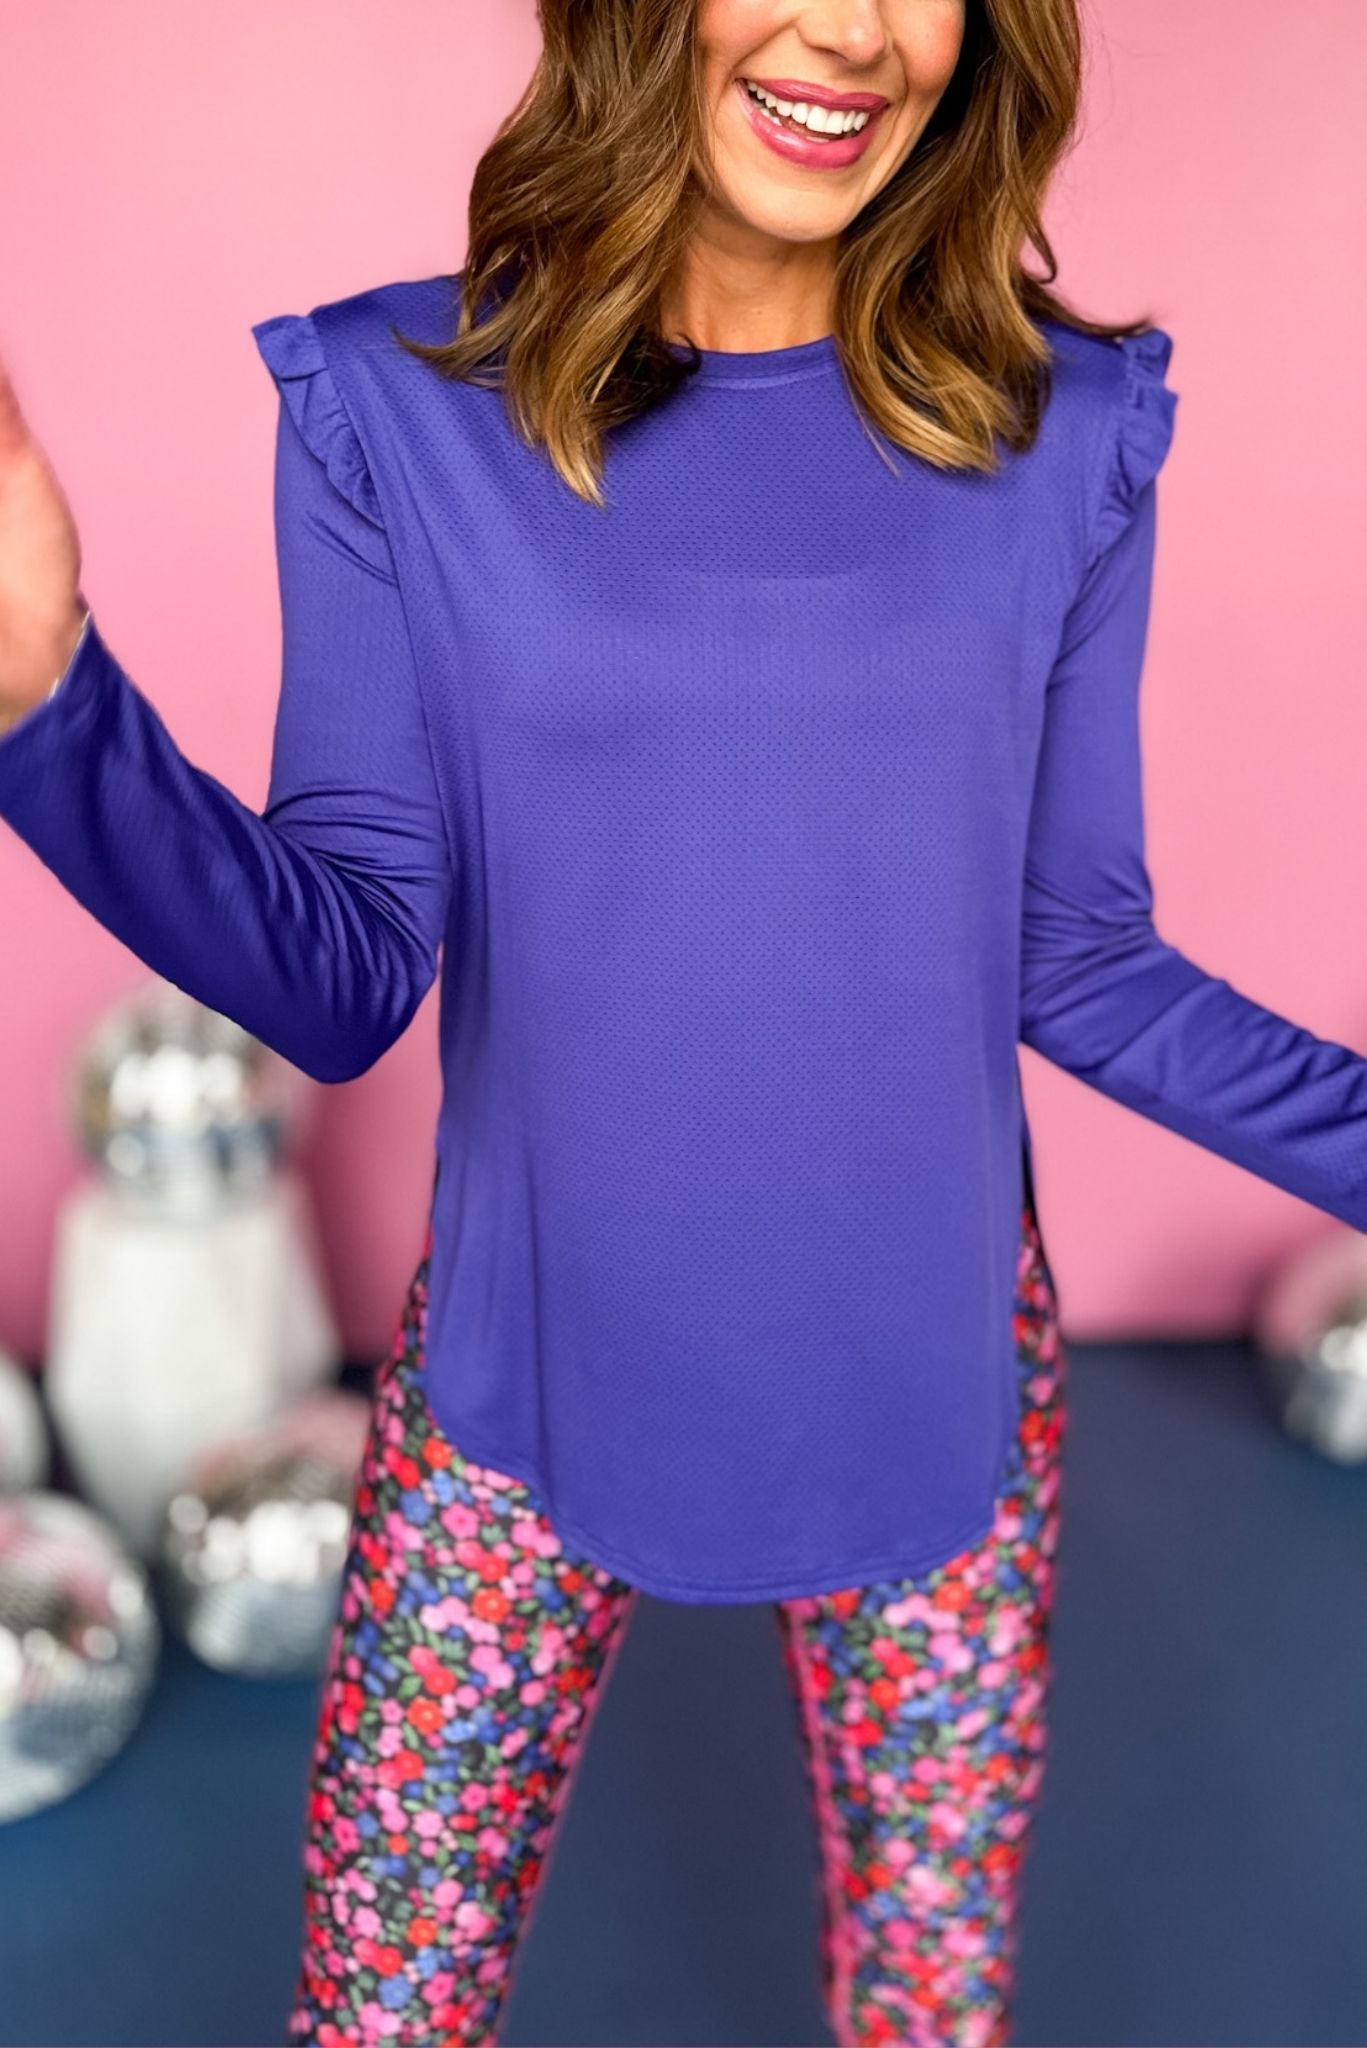 SSYS Purple Long Sleeve Ruffle Hem Active Top, must have top, must have athleisure, elevated style, elevated athleisure, mom style, active style, active wear, fall athleisure, fall style, comfortable style, elevated comfort, shop style your senses by mallory fitzsimmons